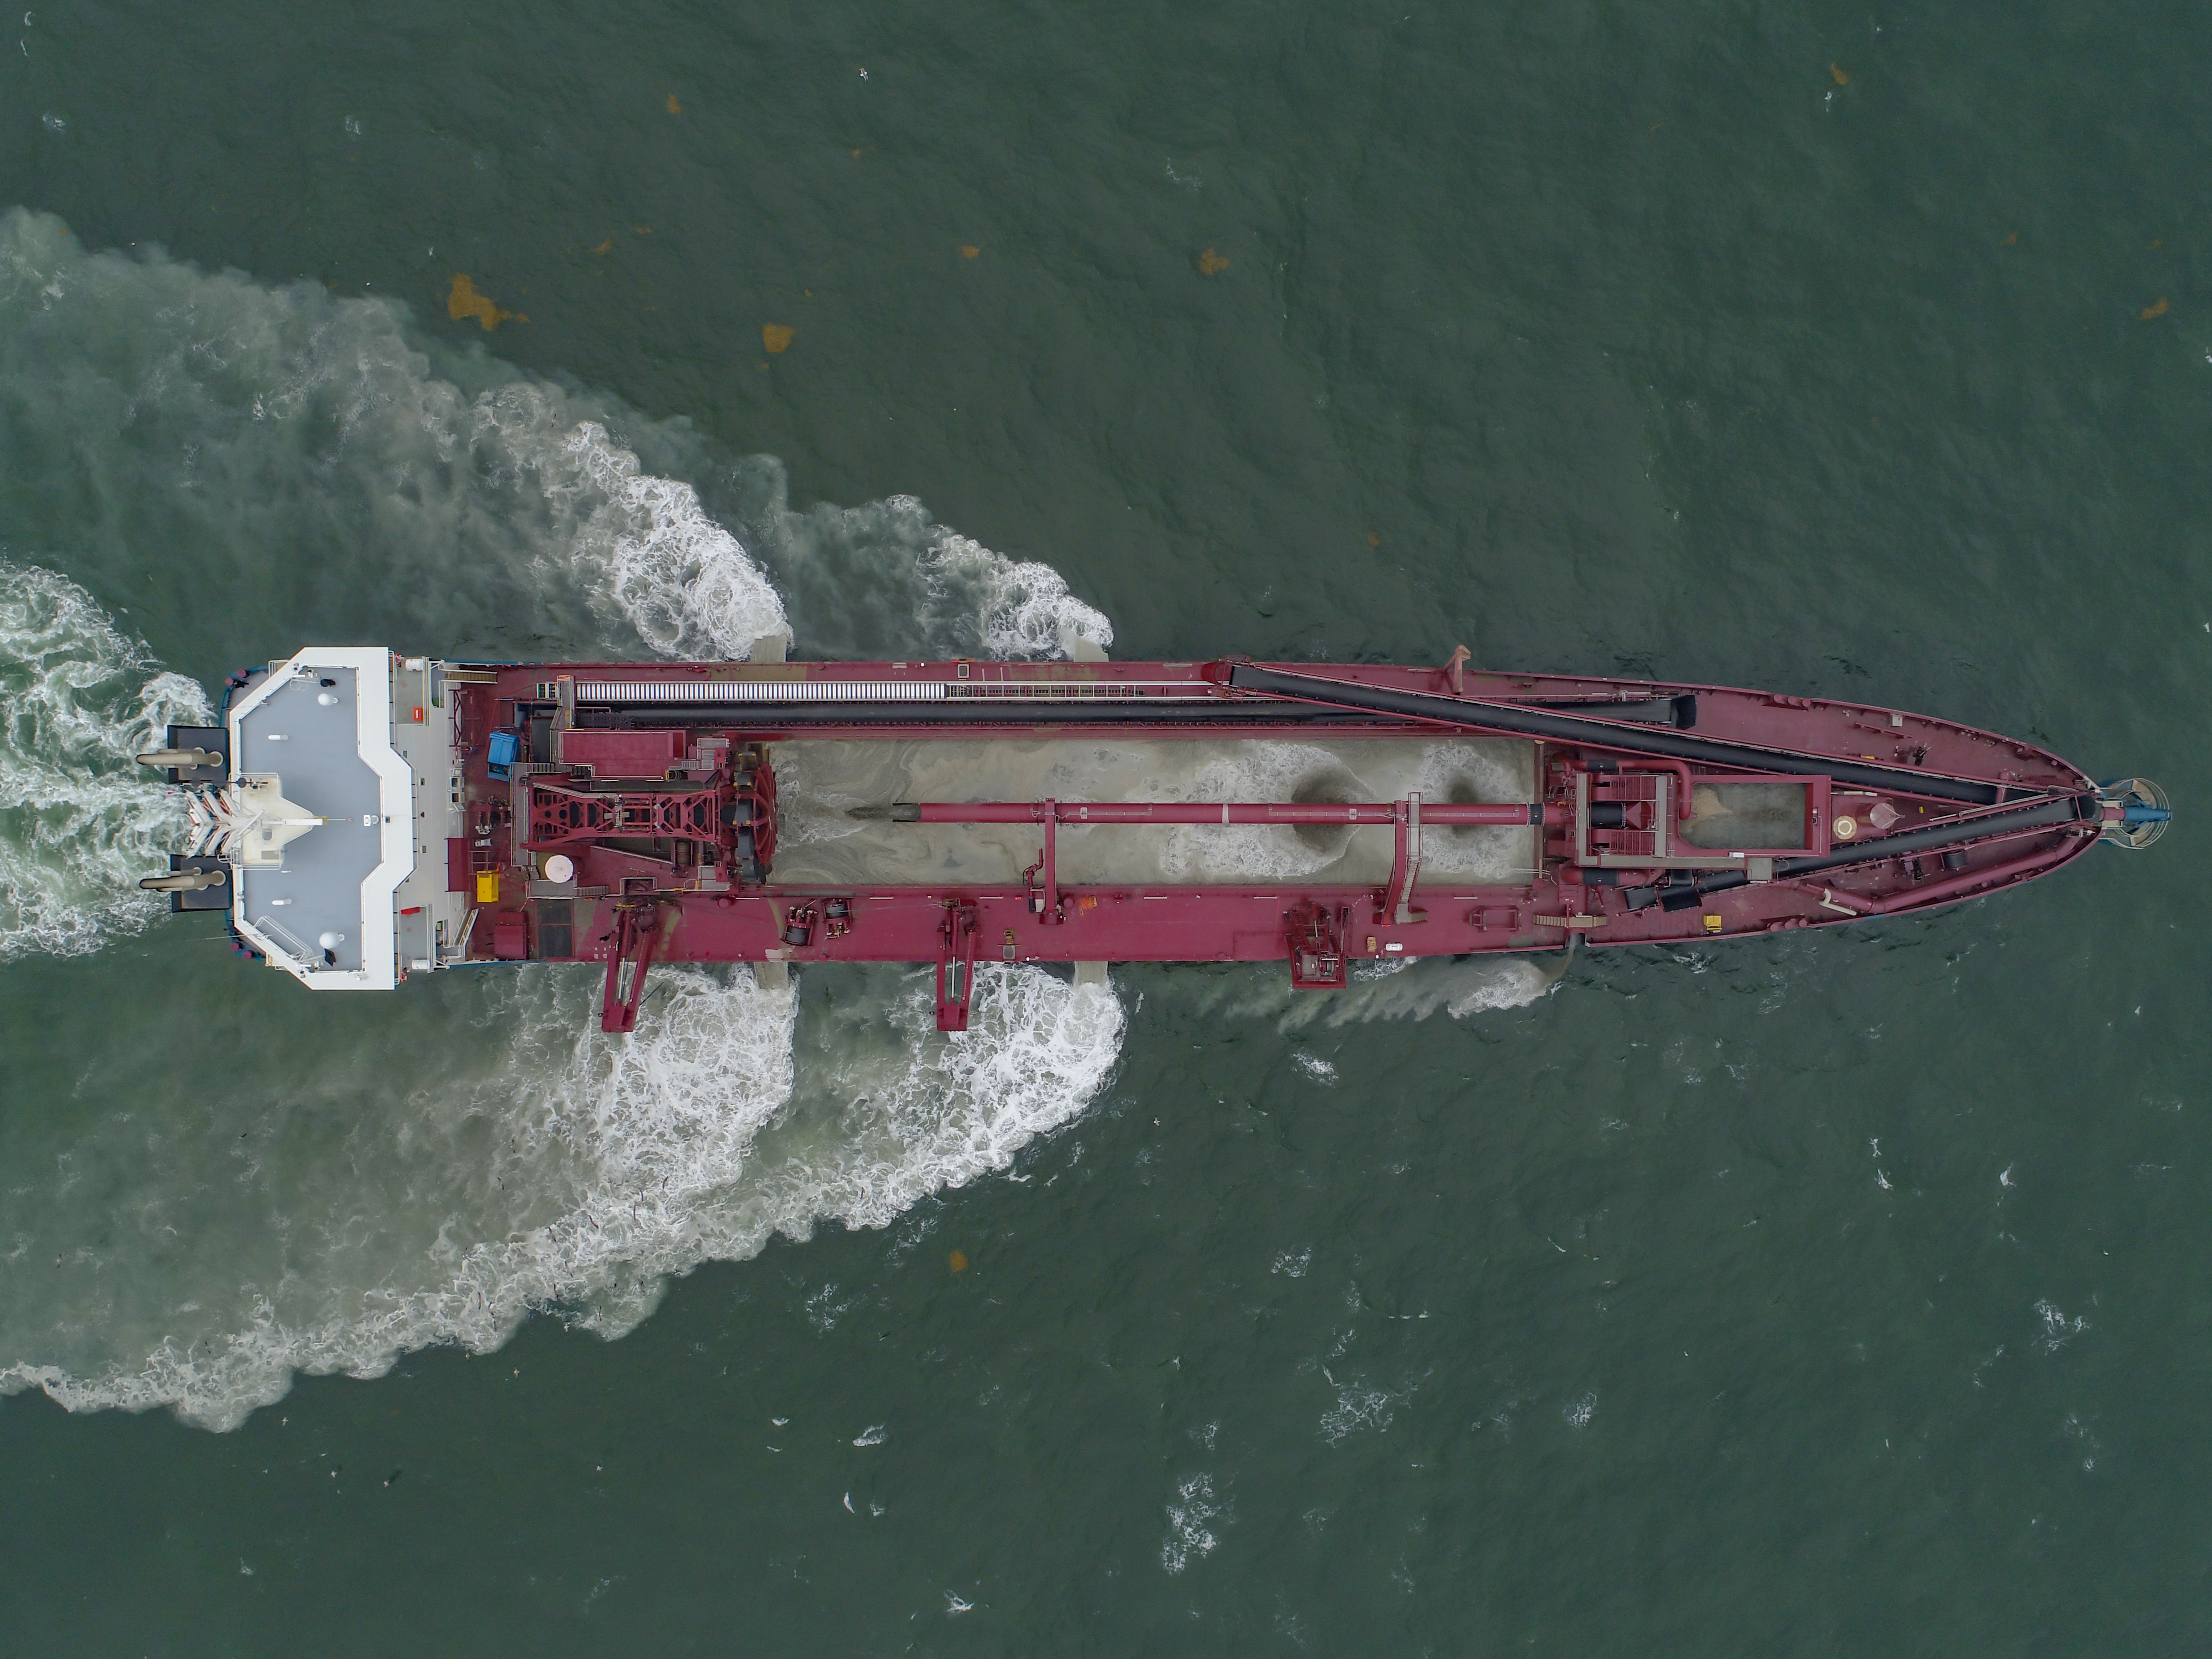 Aggregates dredger DC Orisant seen from above